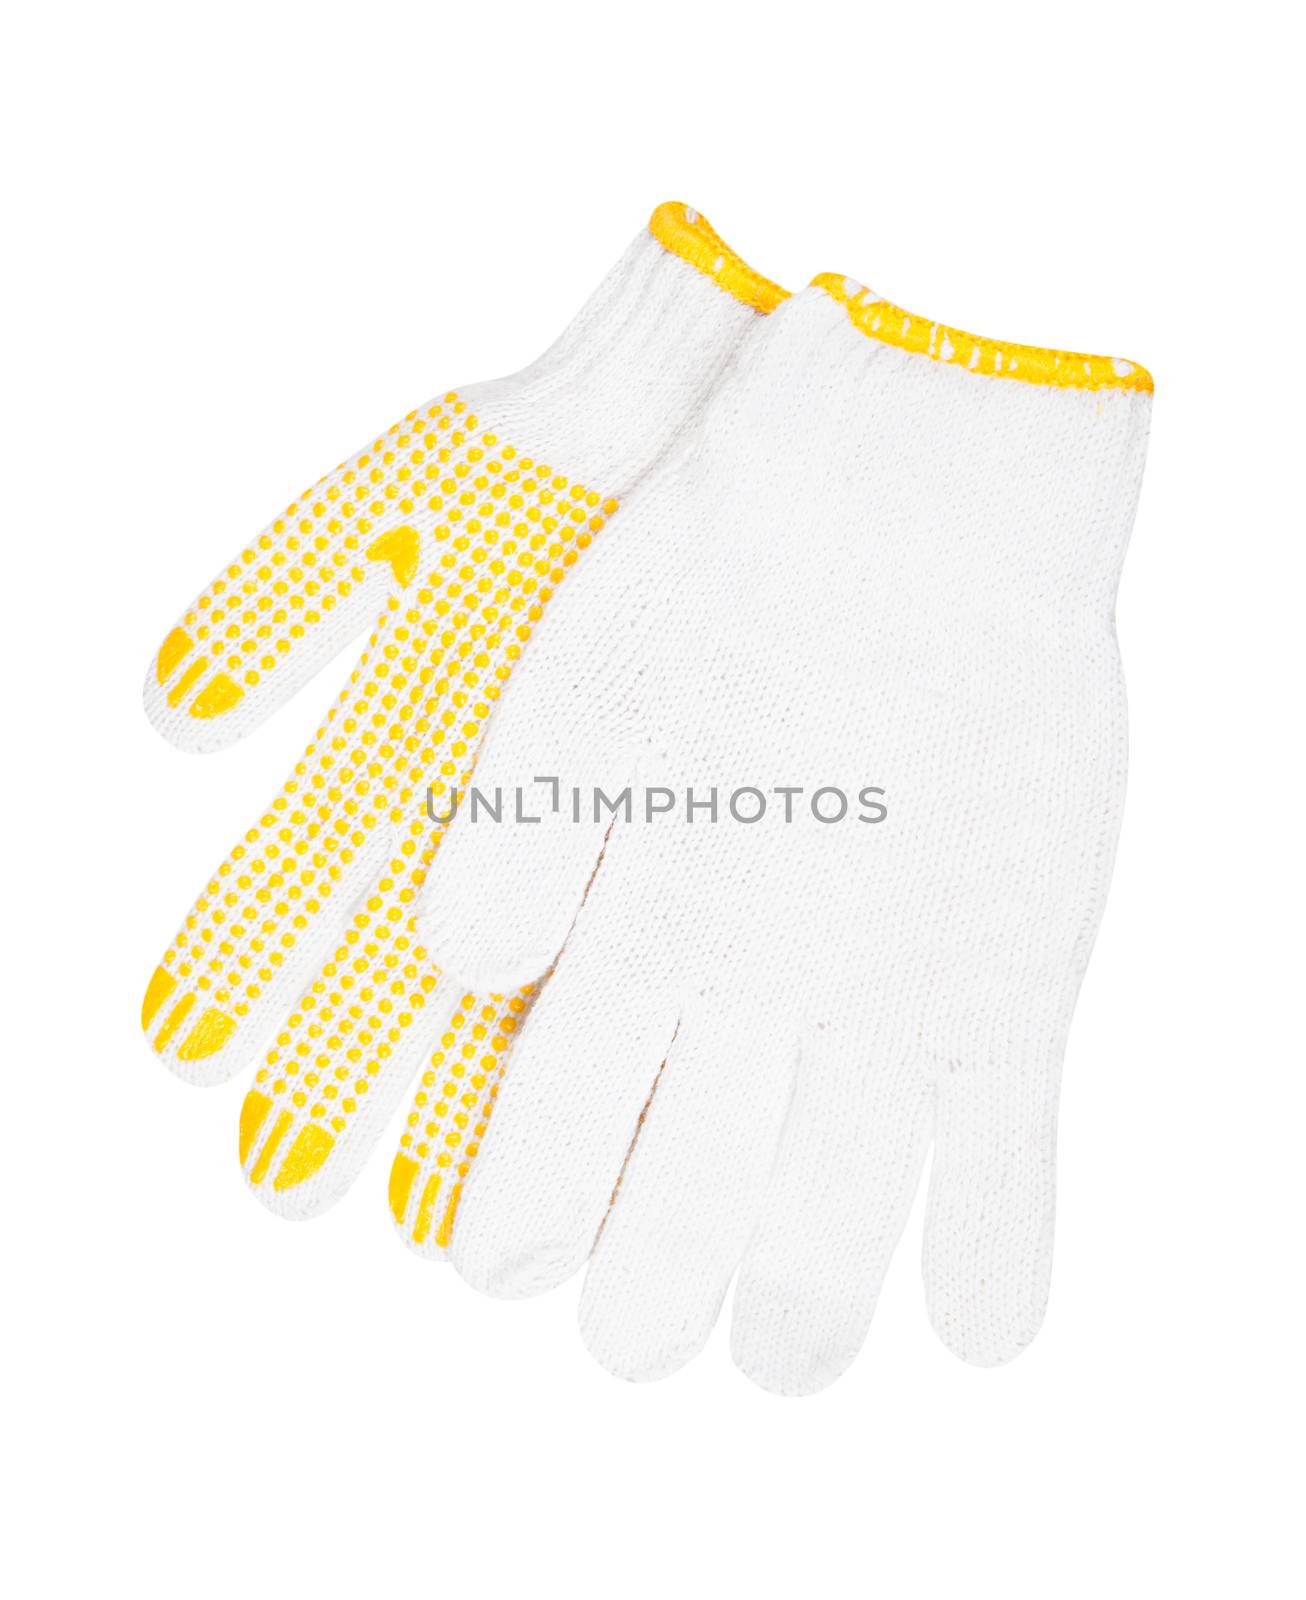 Work gloves made of cotton fabric with rubber coating by AleksandrN